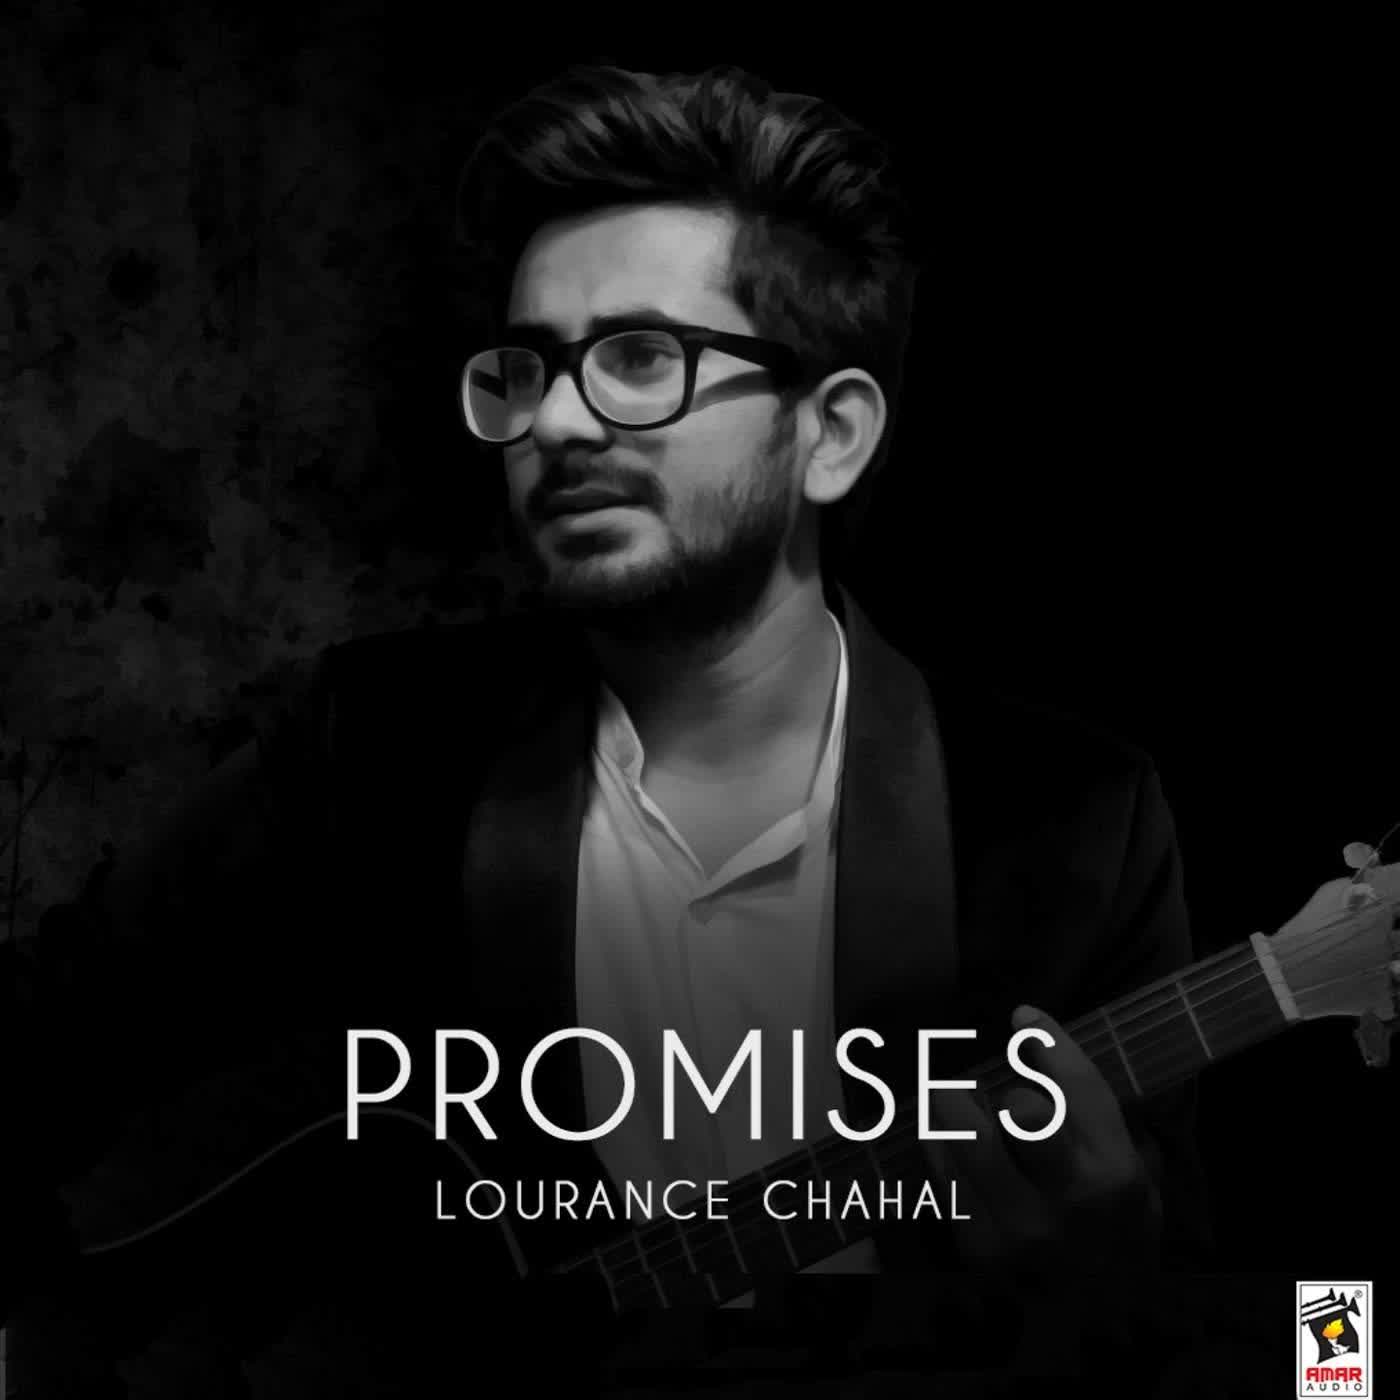 Promises Lourance Chahal  Mp3 song download